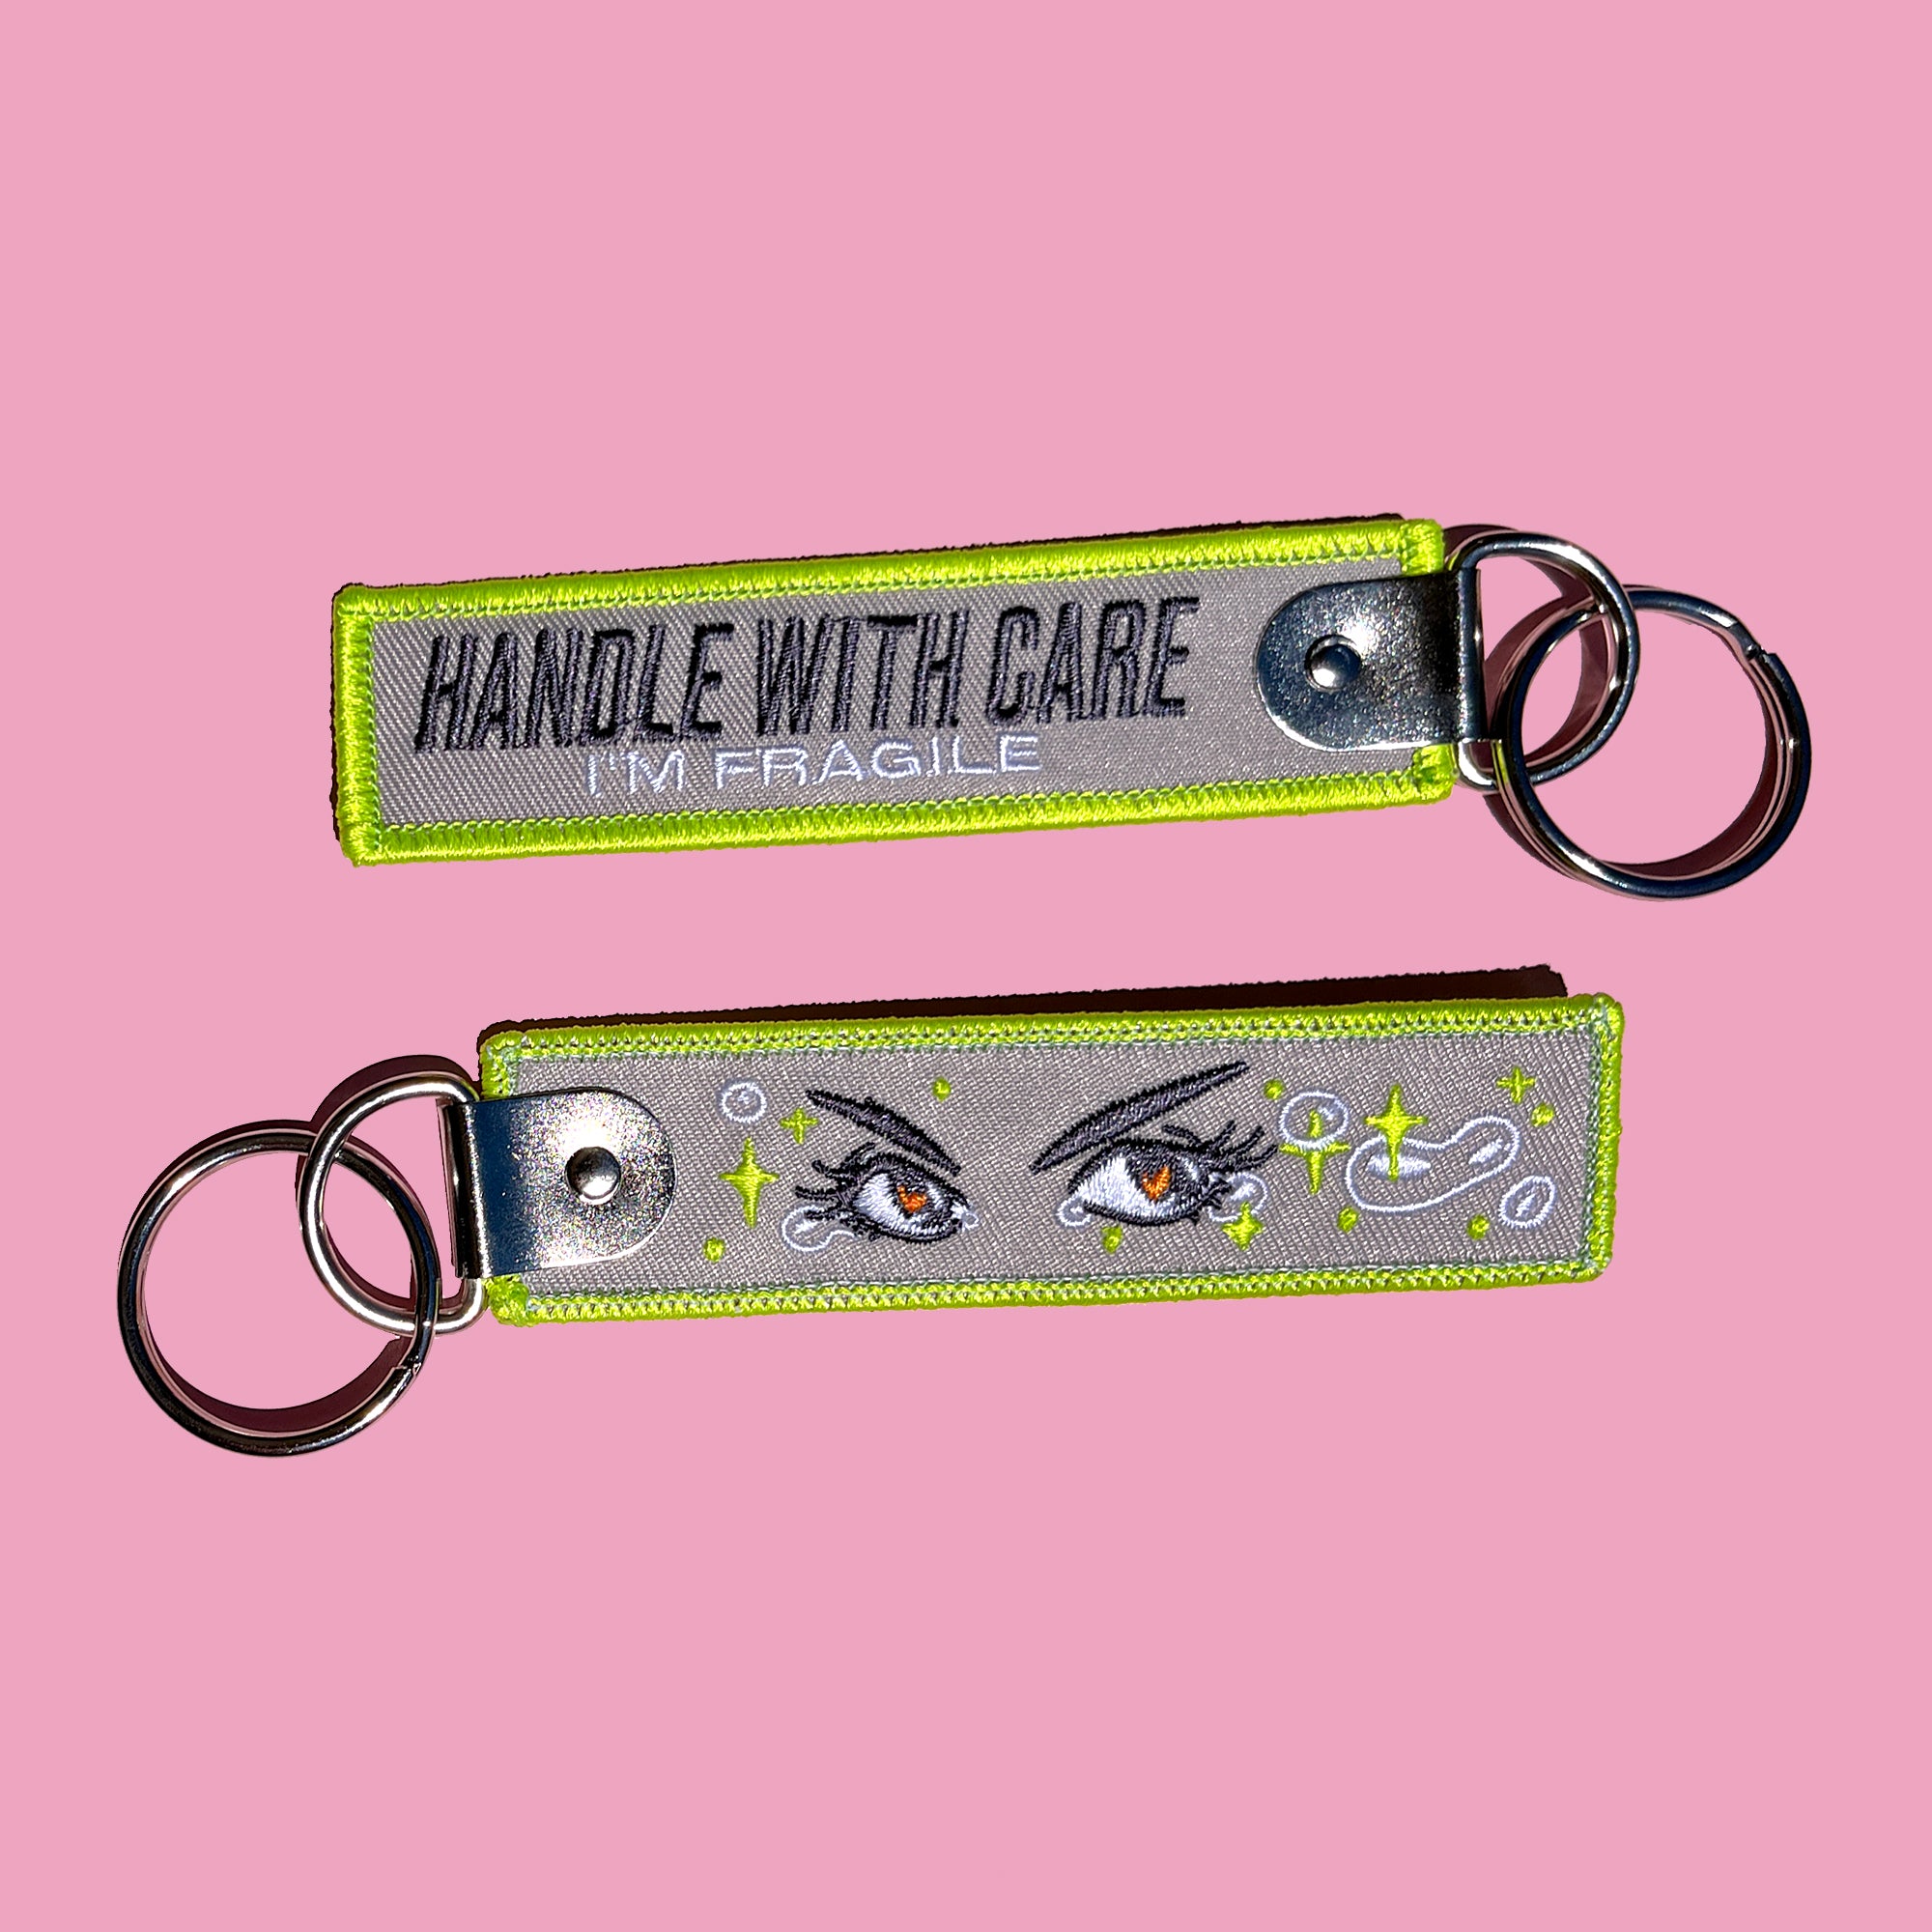 Handle With Care, I'm Fragile Keychain - Neon Yellow